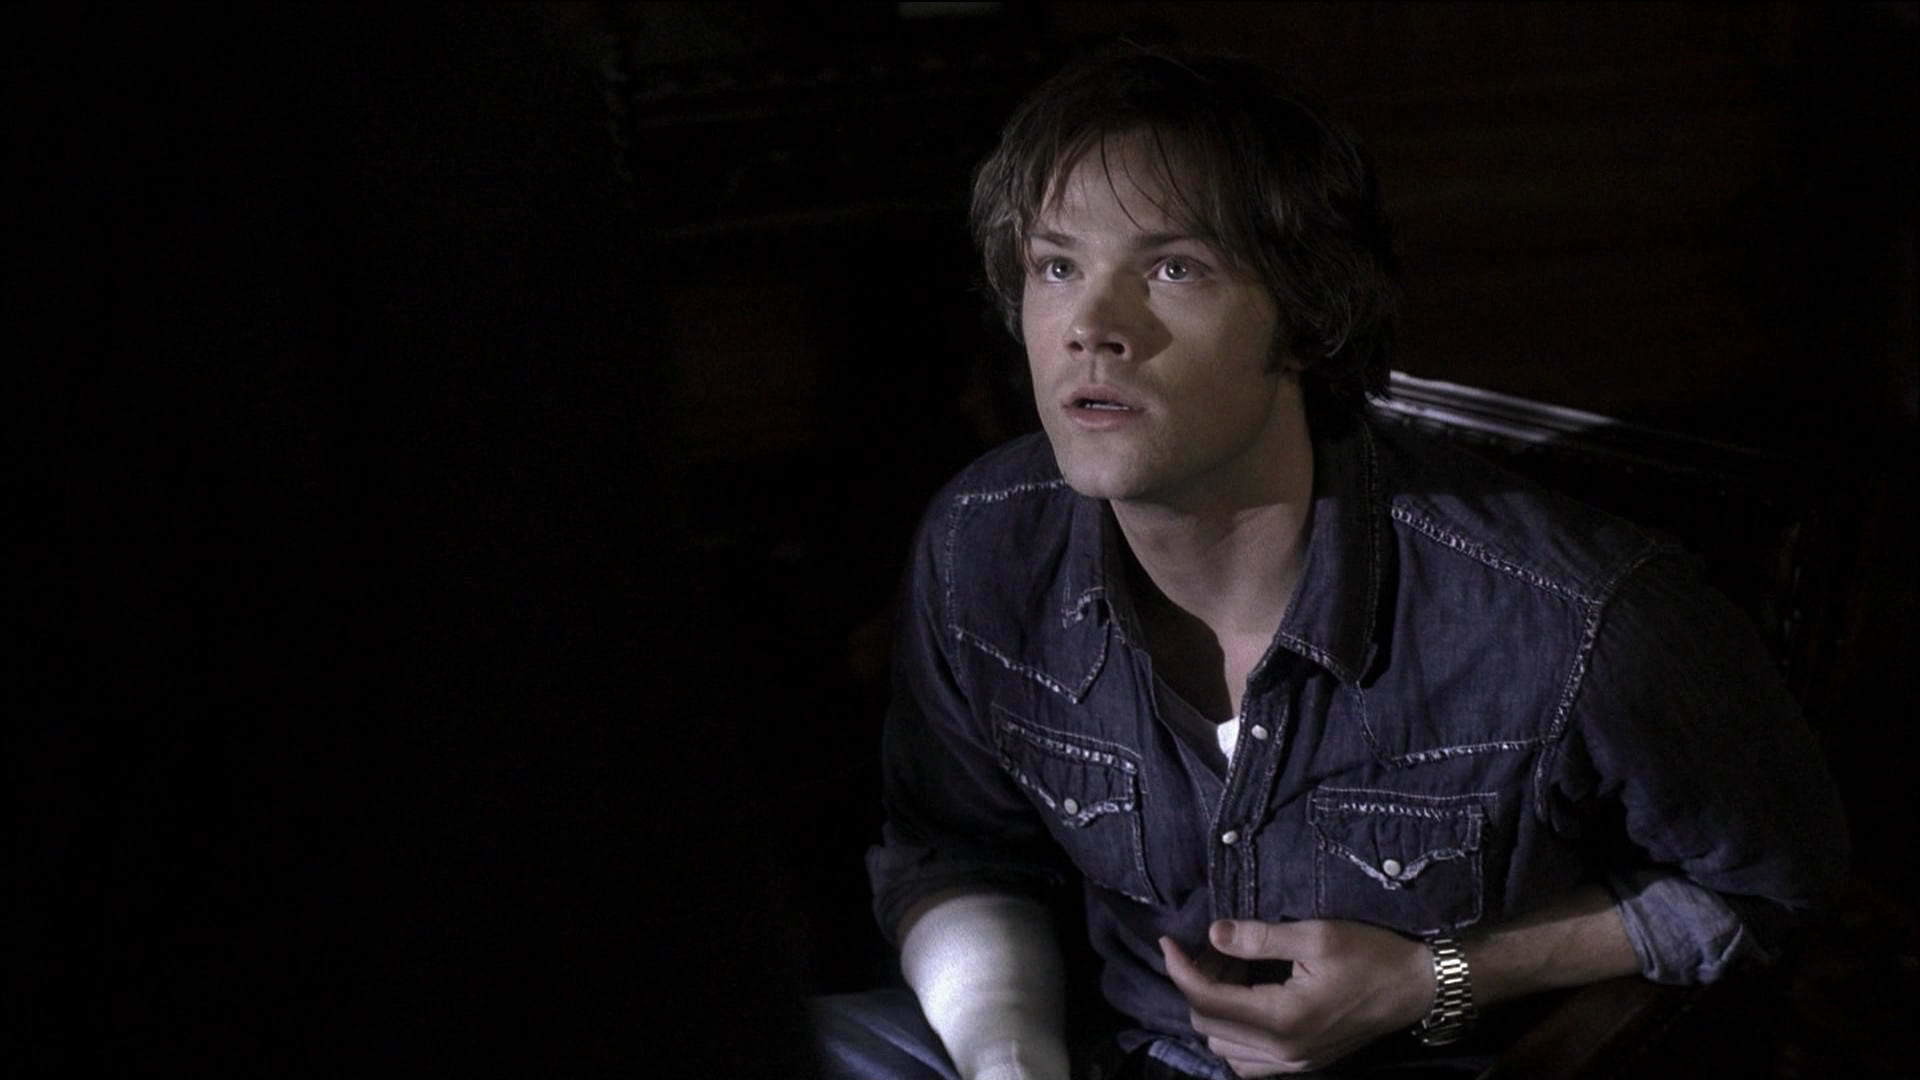 1920x1080, Sam Winchester Images Playthings Hd Wallpaper - Darkness - HD Wallpaper 